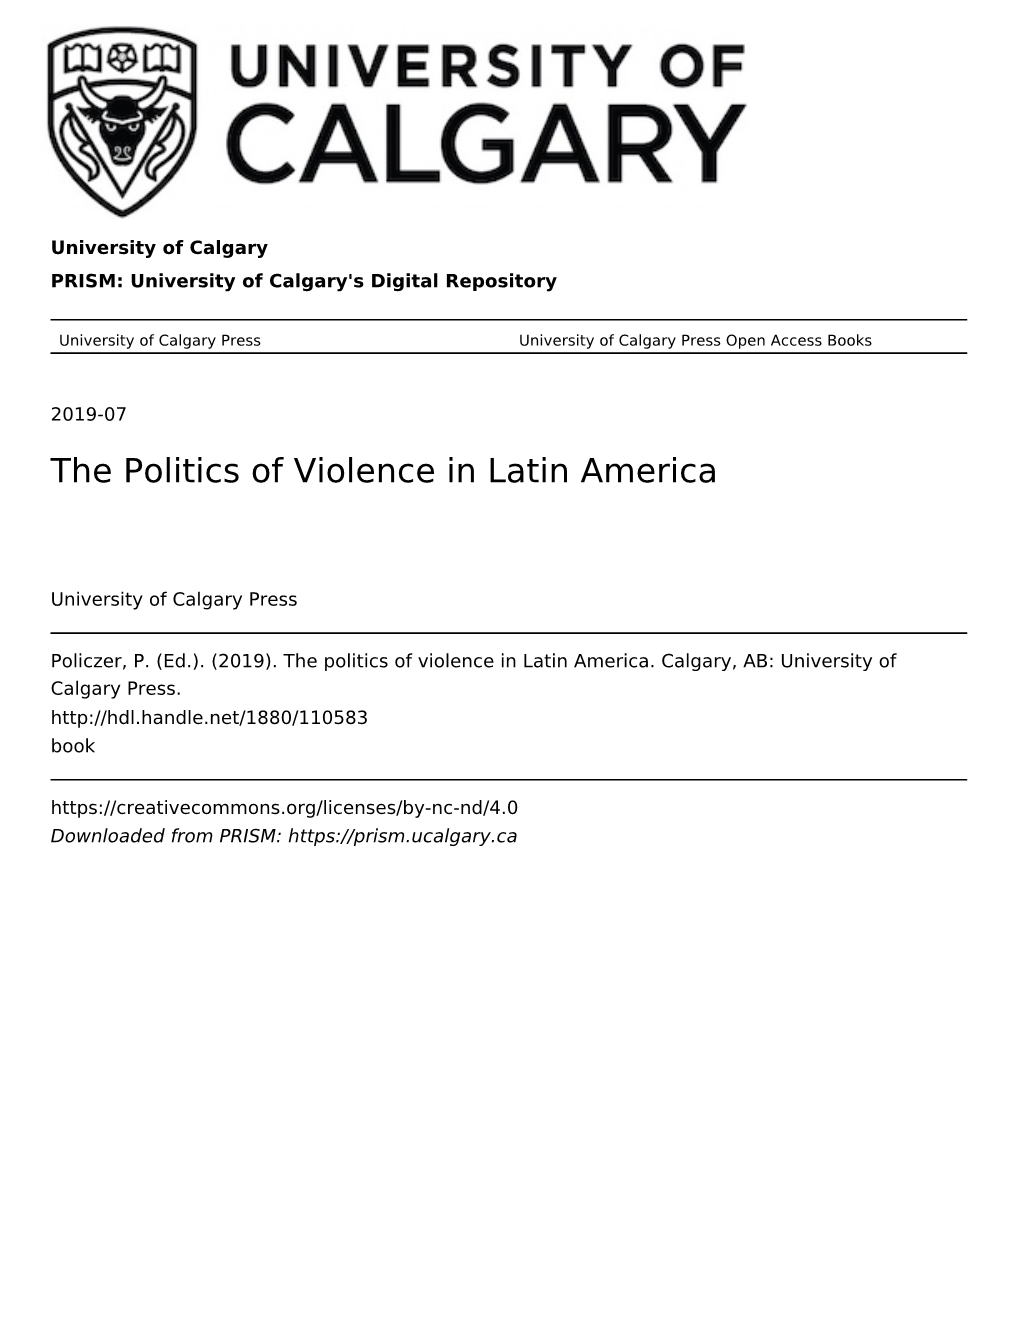 Murder As a Communicative Act in Mexico